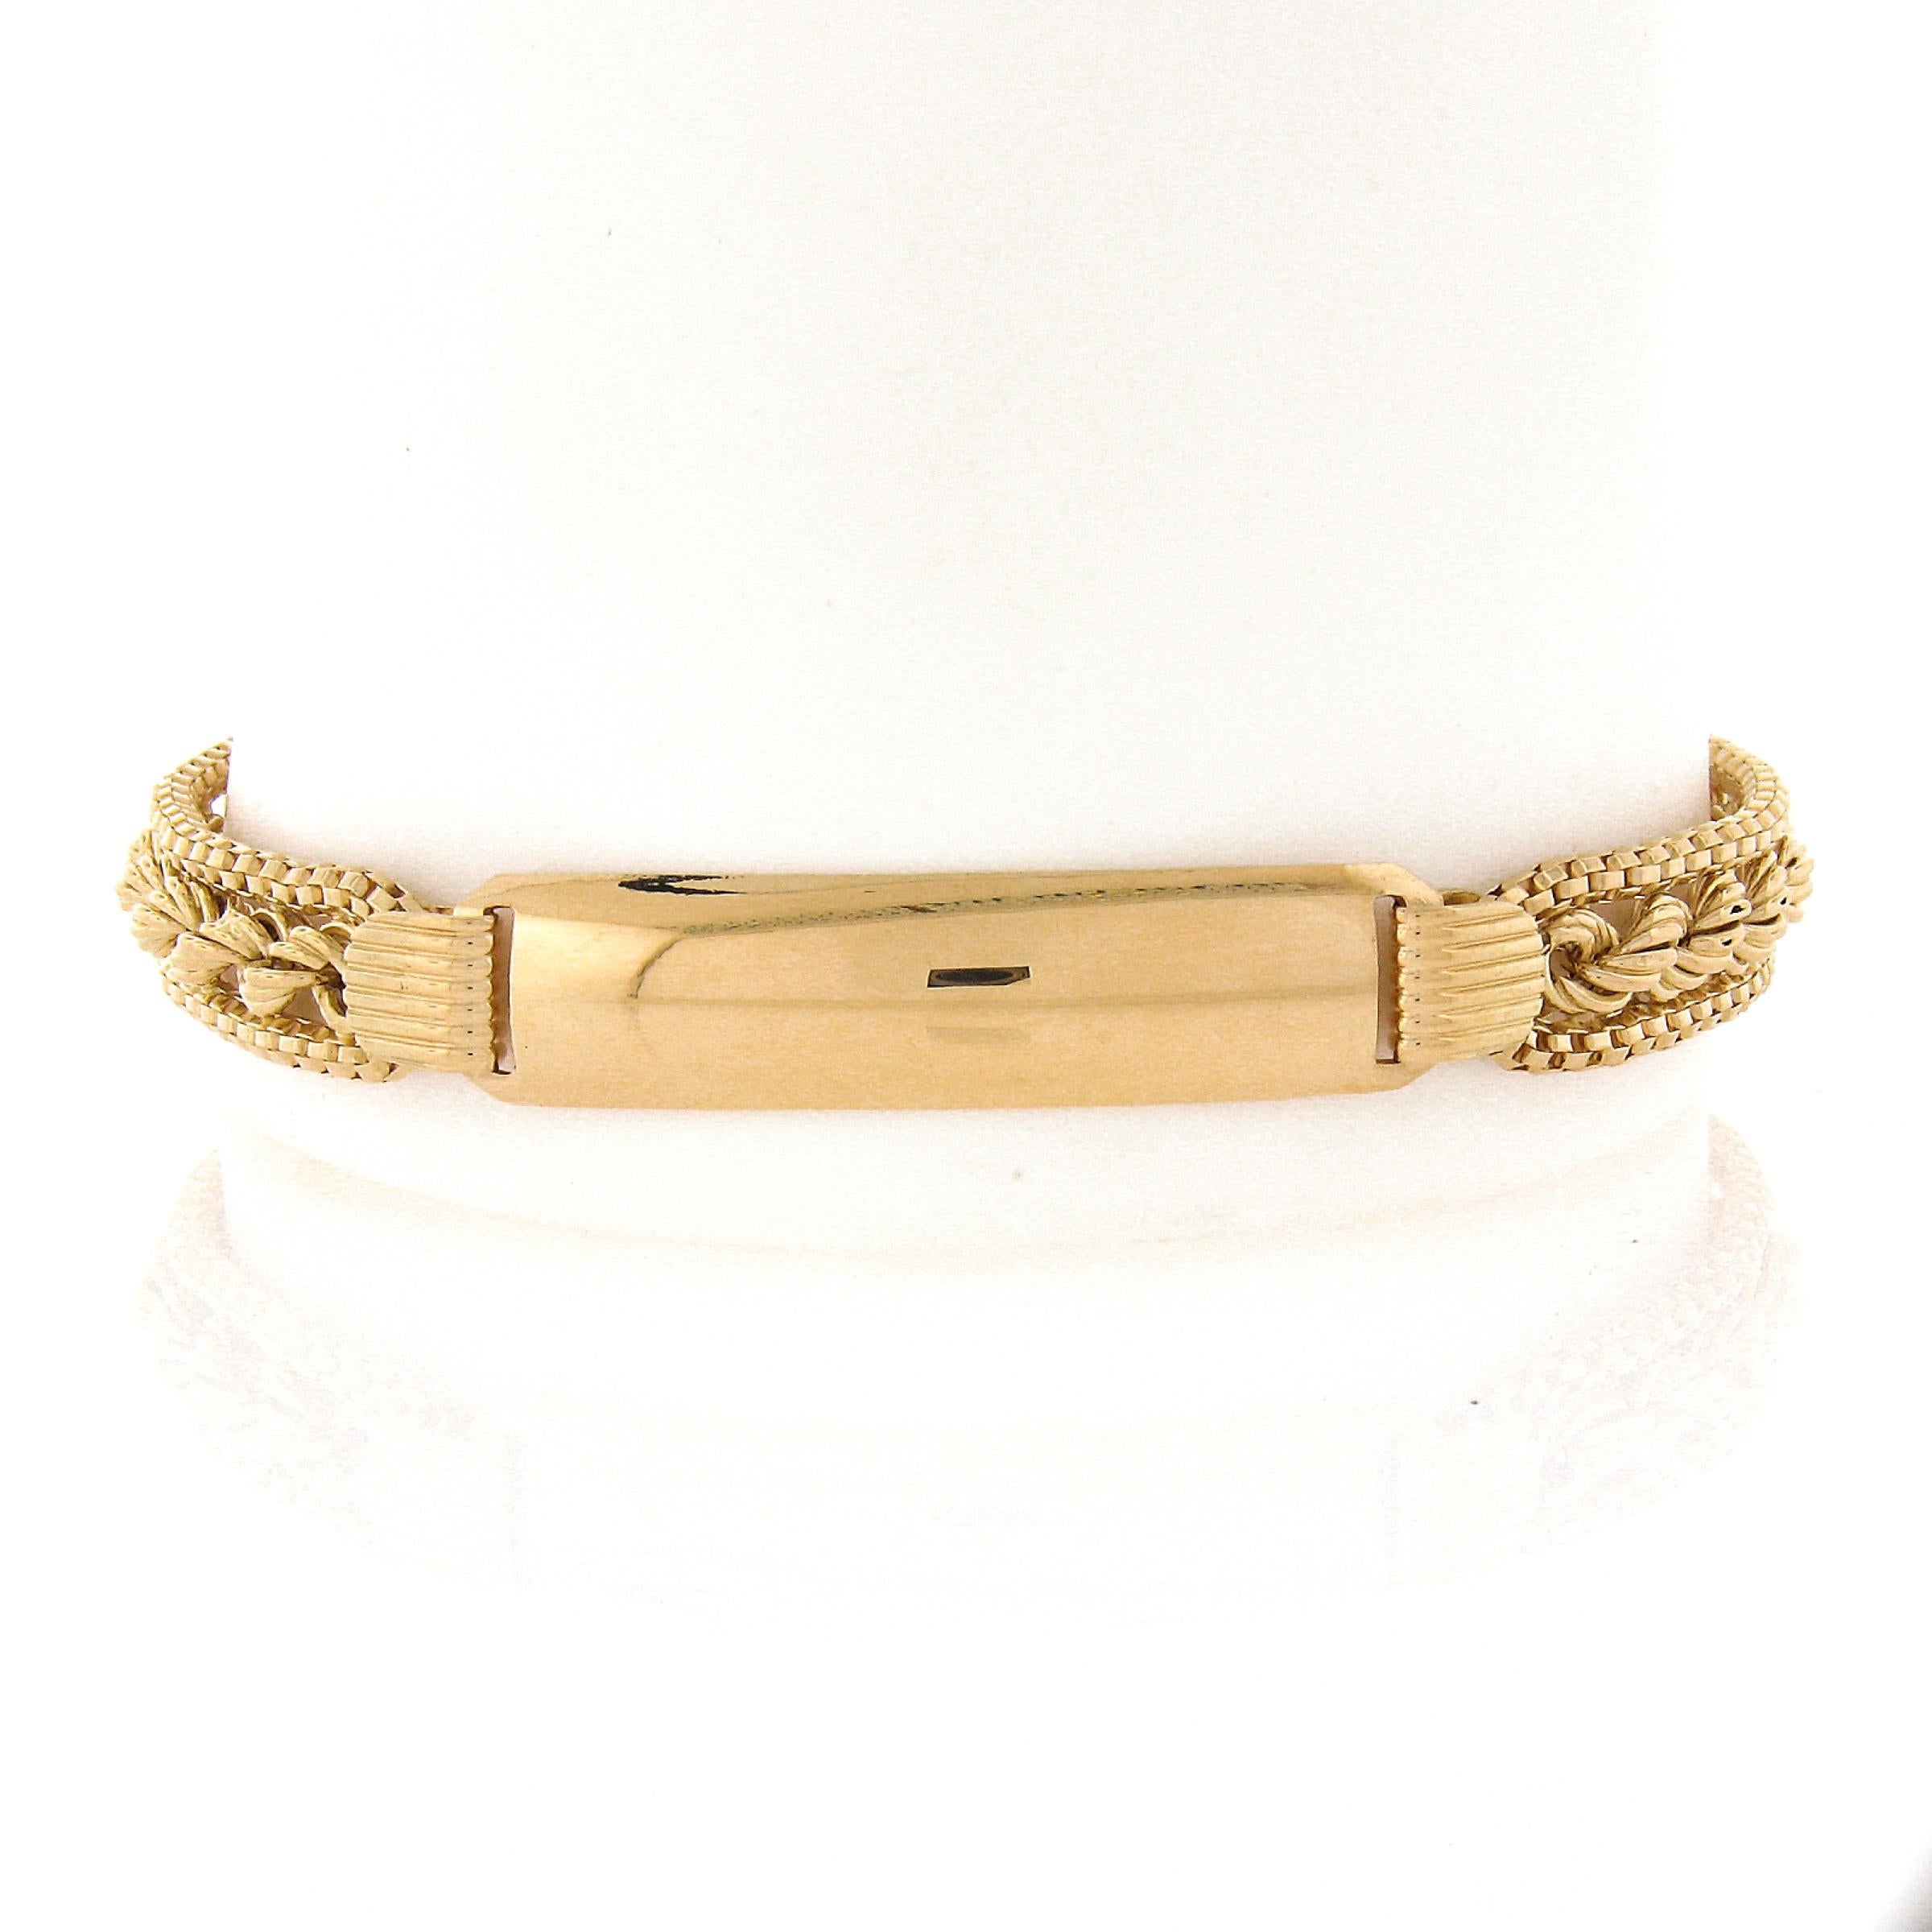 Material: Solid 18k Yellow Gold
Weight: 14.78 Grams
Length: Will comfortably fit up to a 7.5 inch wrist (fitted on a wrist) 
Chain Type: 4.1mm Rope Link
Clasp: Spring Ring
Centerpiece Dimensions: 37.6x8.7mm - Engrave-able (Please contact us prior to